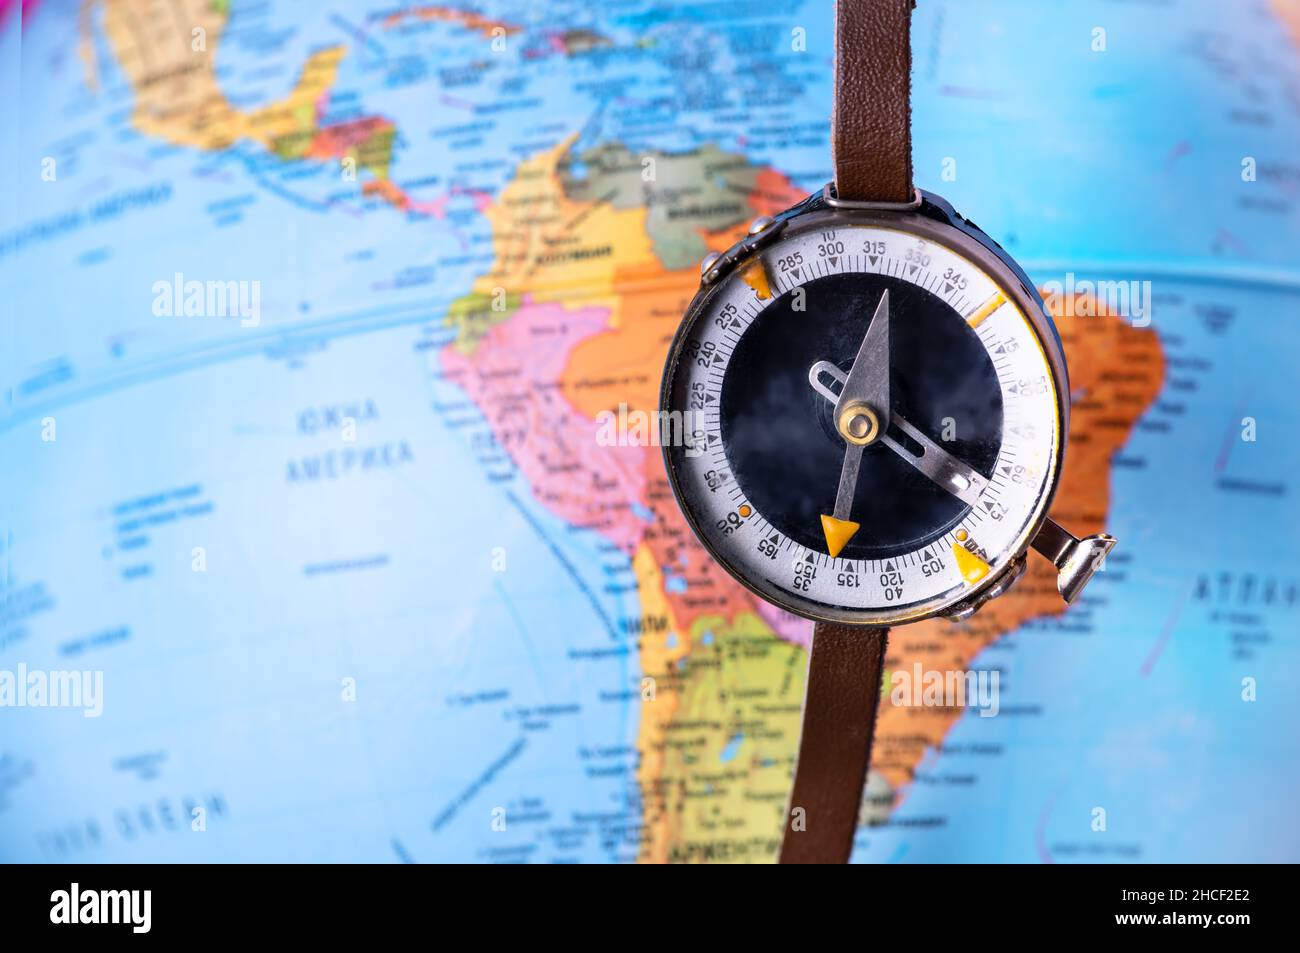 Compass on top of world map. Magnetic compass on world map. Stock Photo